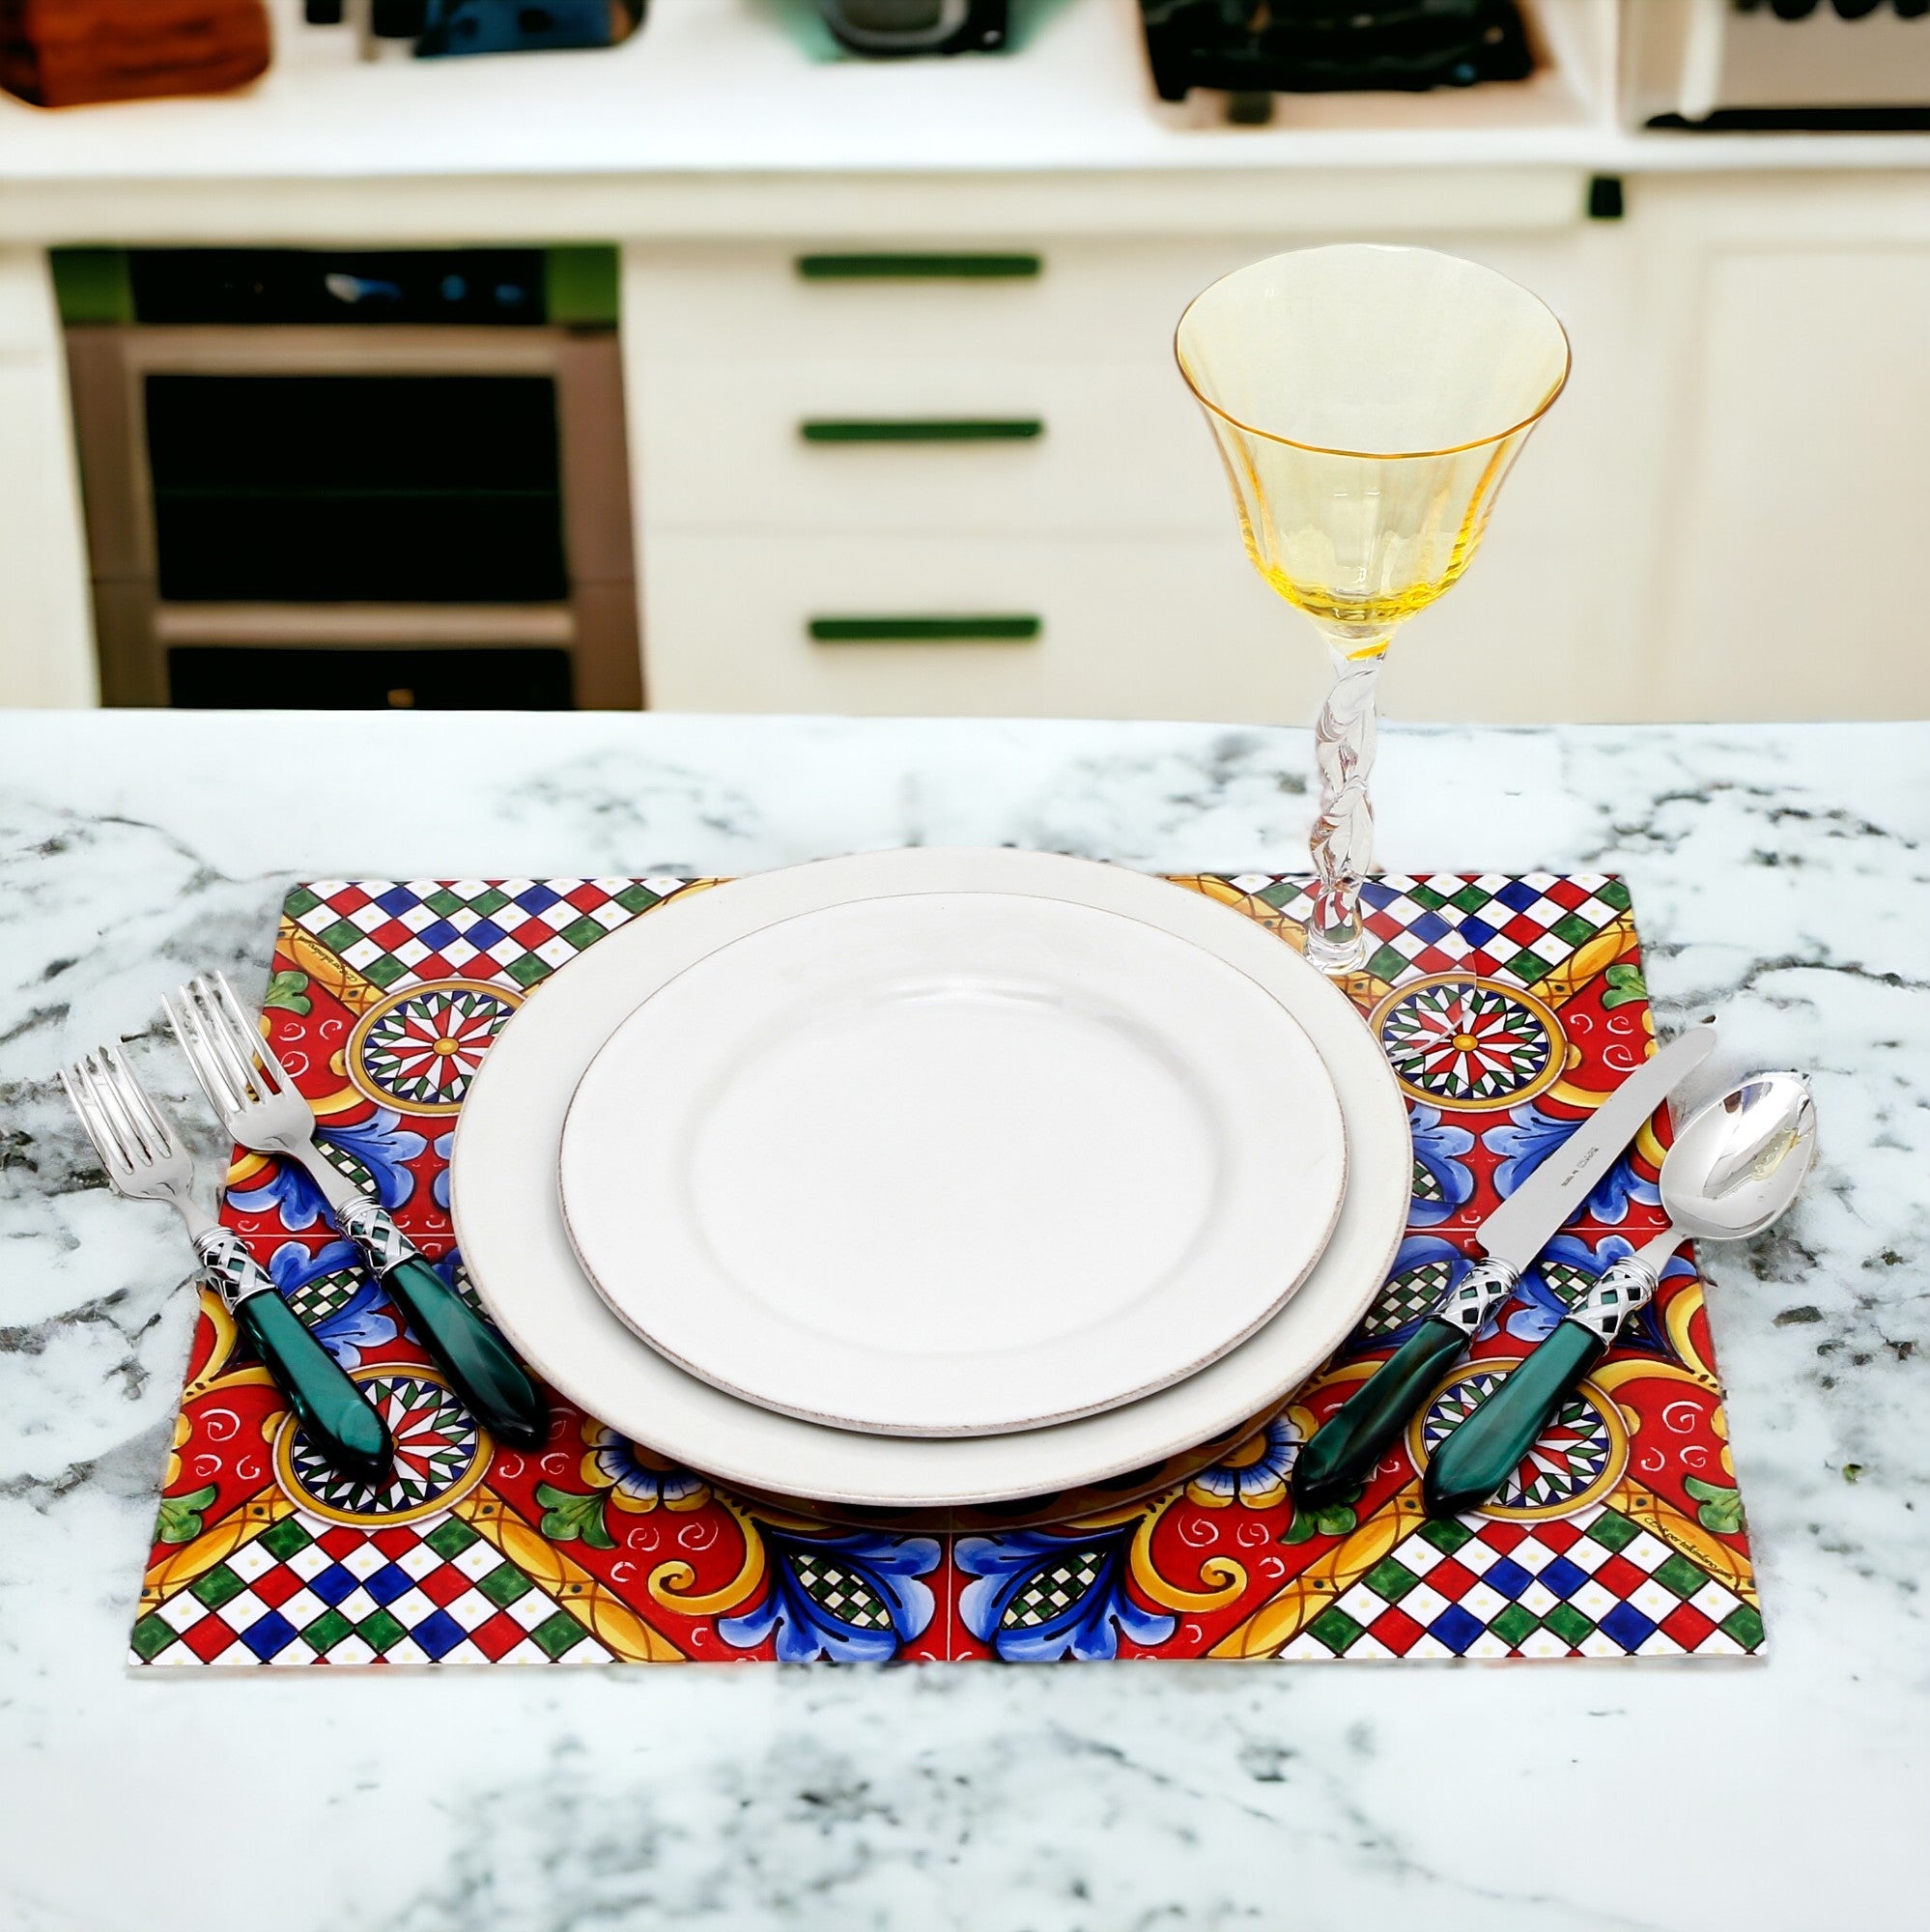 ITALIAN DREAM: Large Placemat - Stain Proof and Water Repellent PVC - Design ACIREALE/B